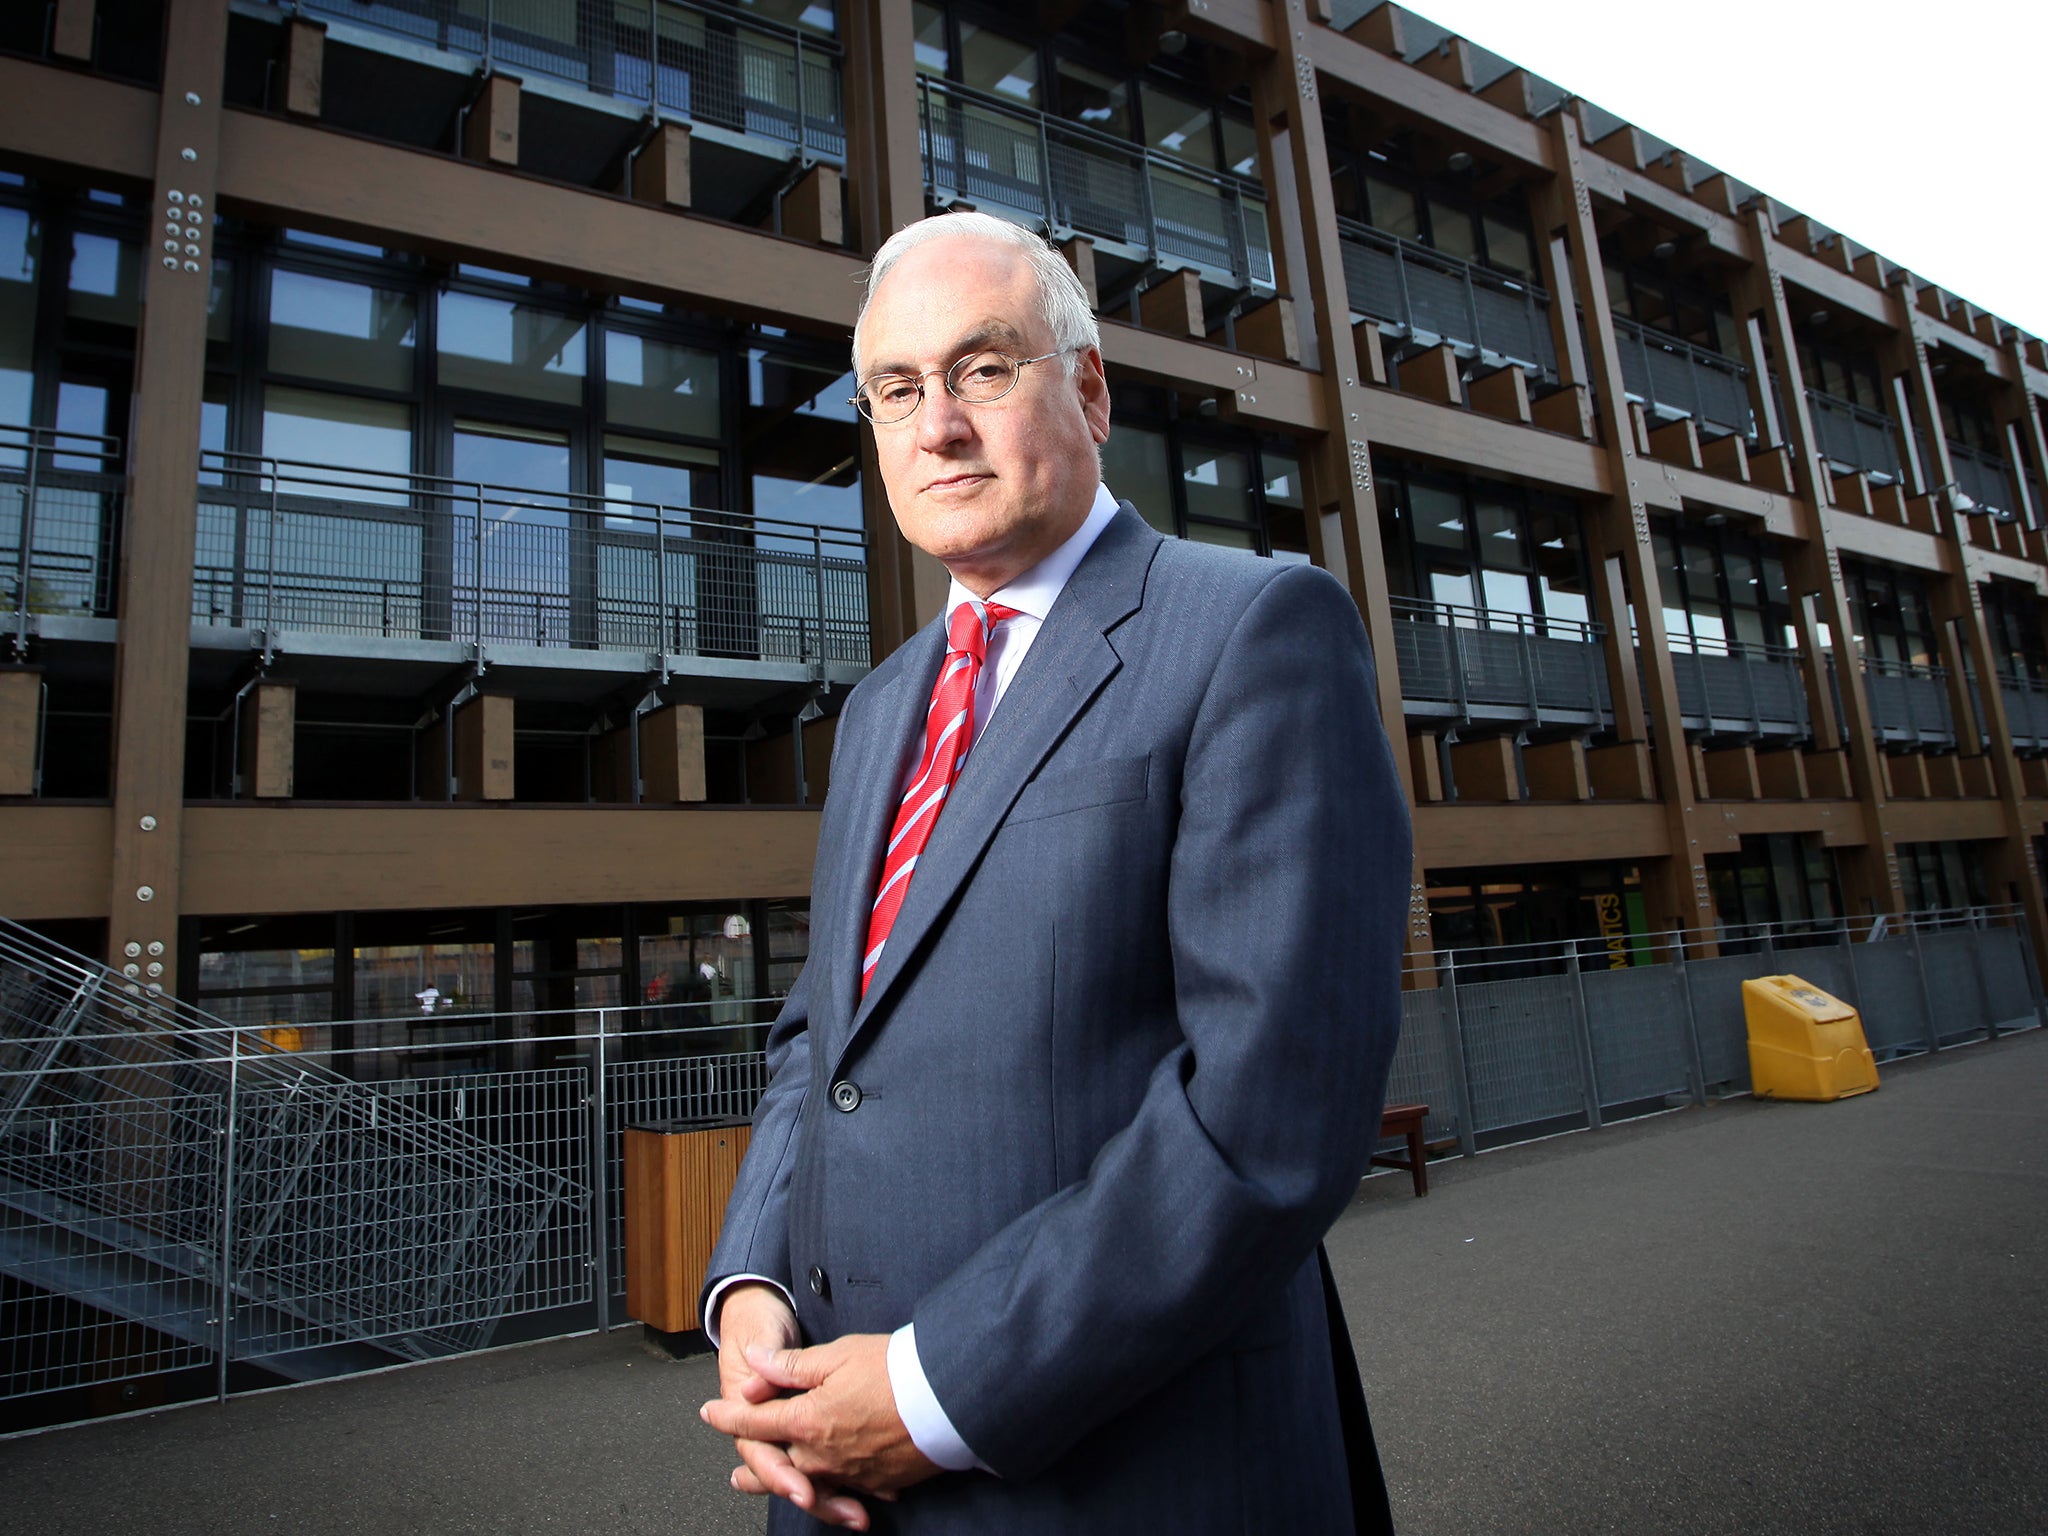 Sir Michael Wilshaw has attacked the Government’s grammar schools plan